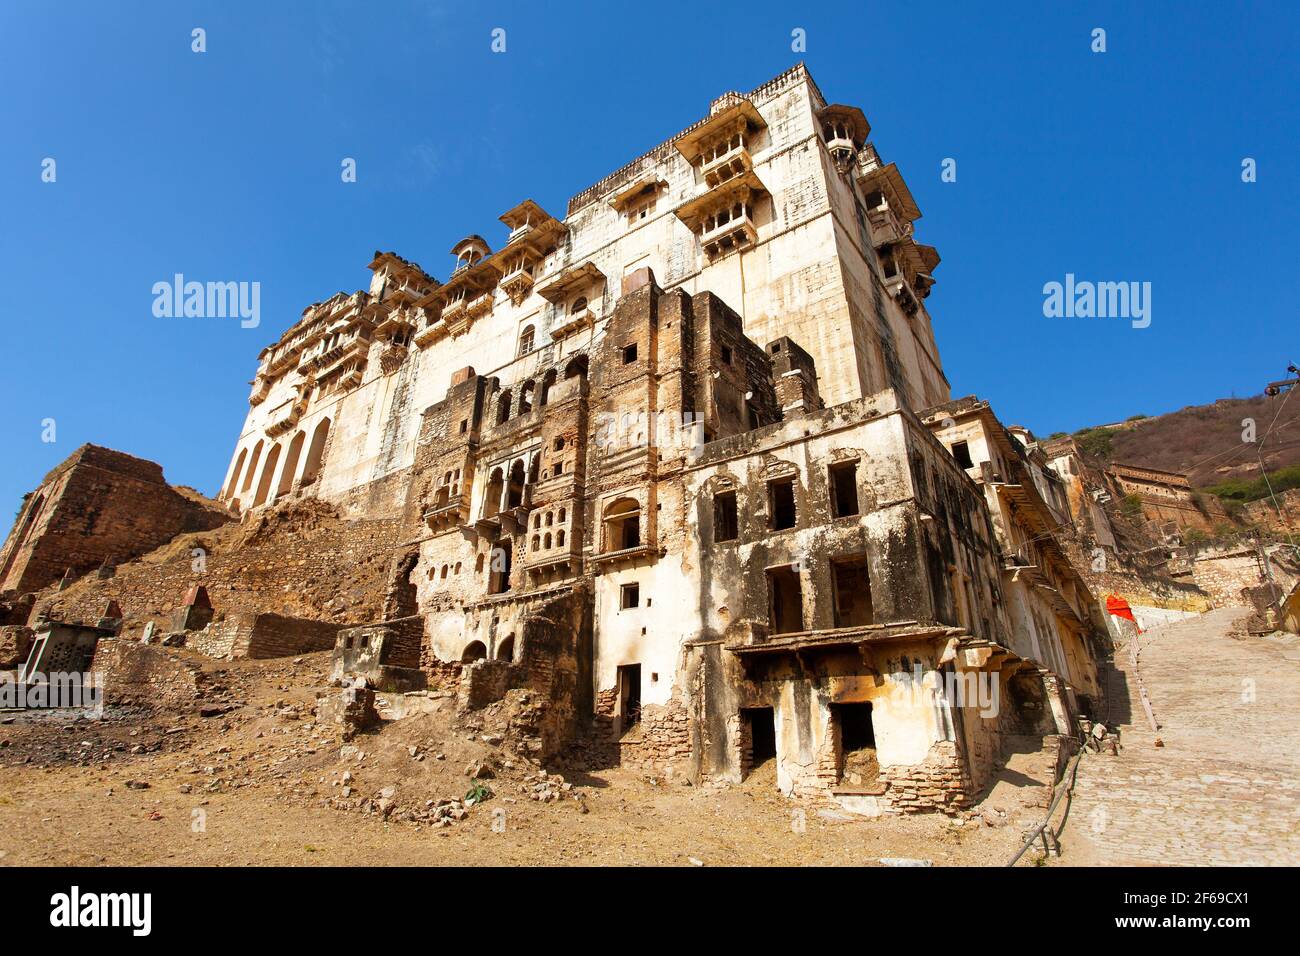 Taragarh fort in Bundi town, typical medieval fortress in Rajasthan, India Stock Photo